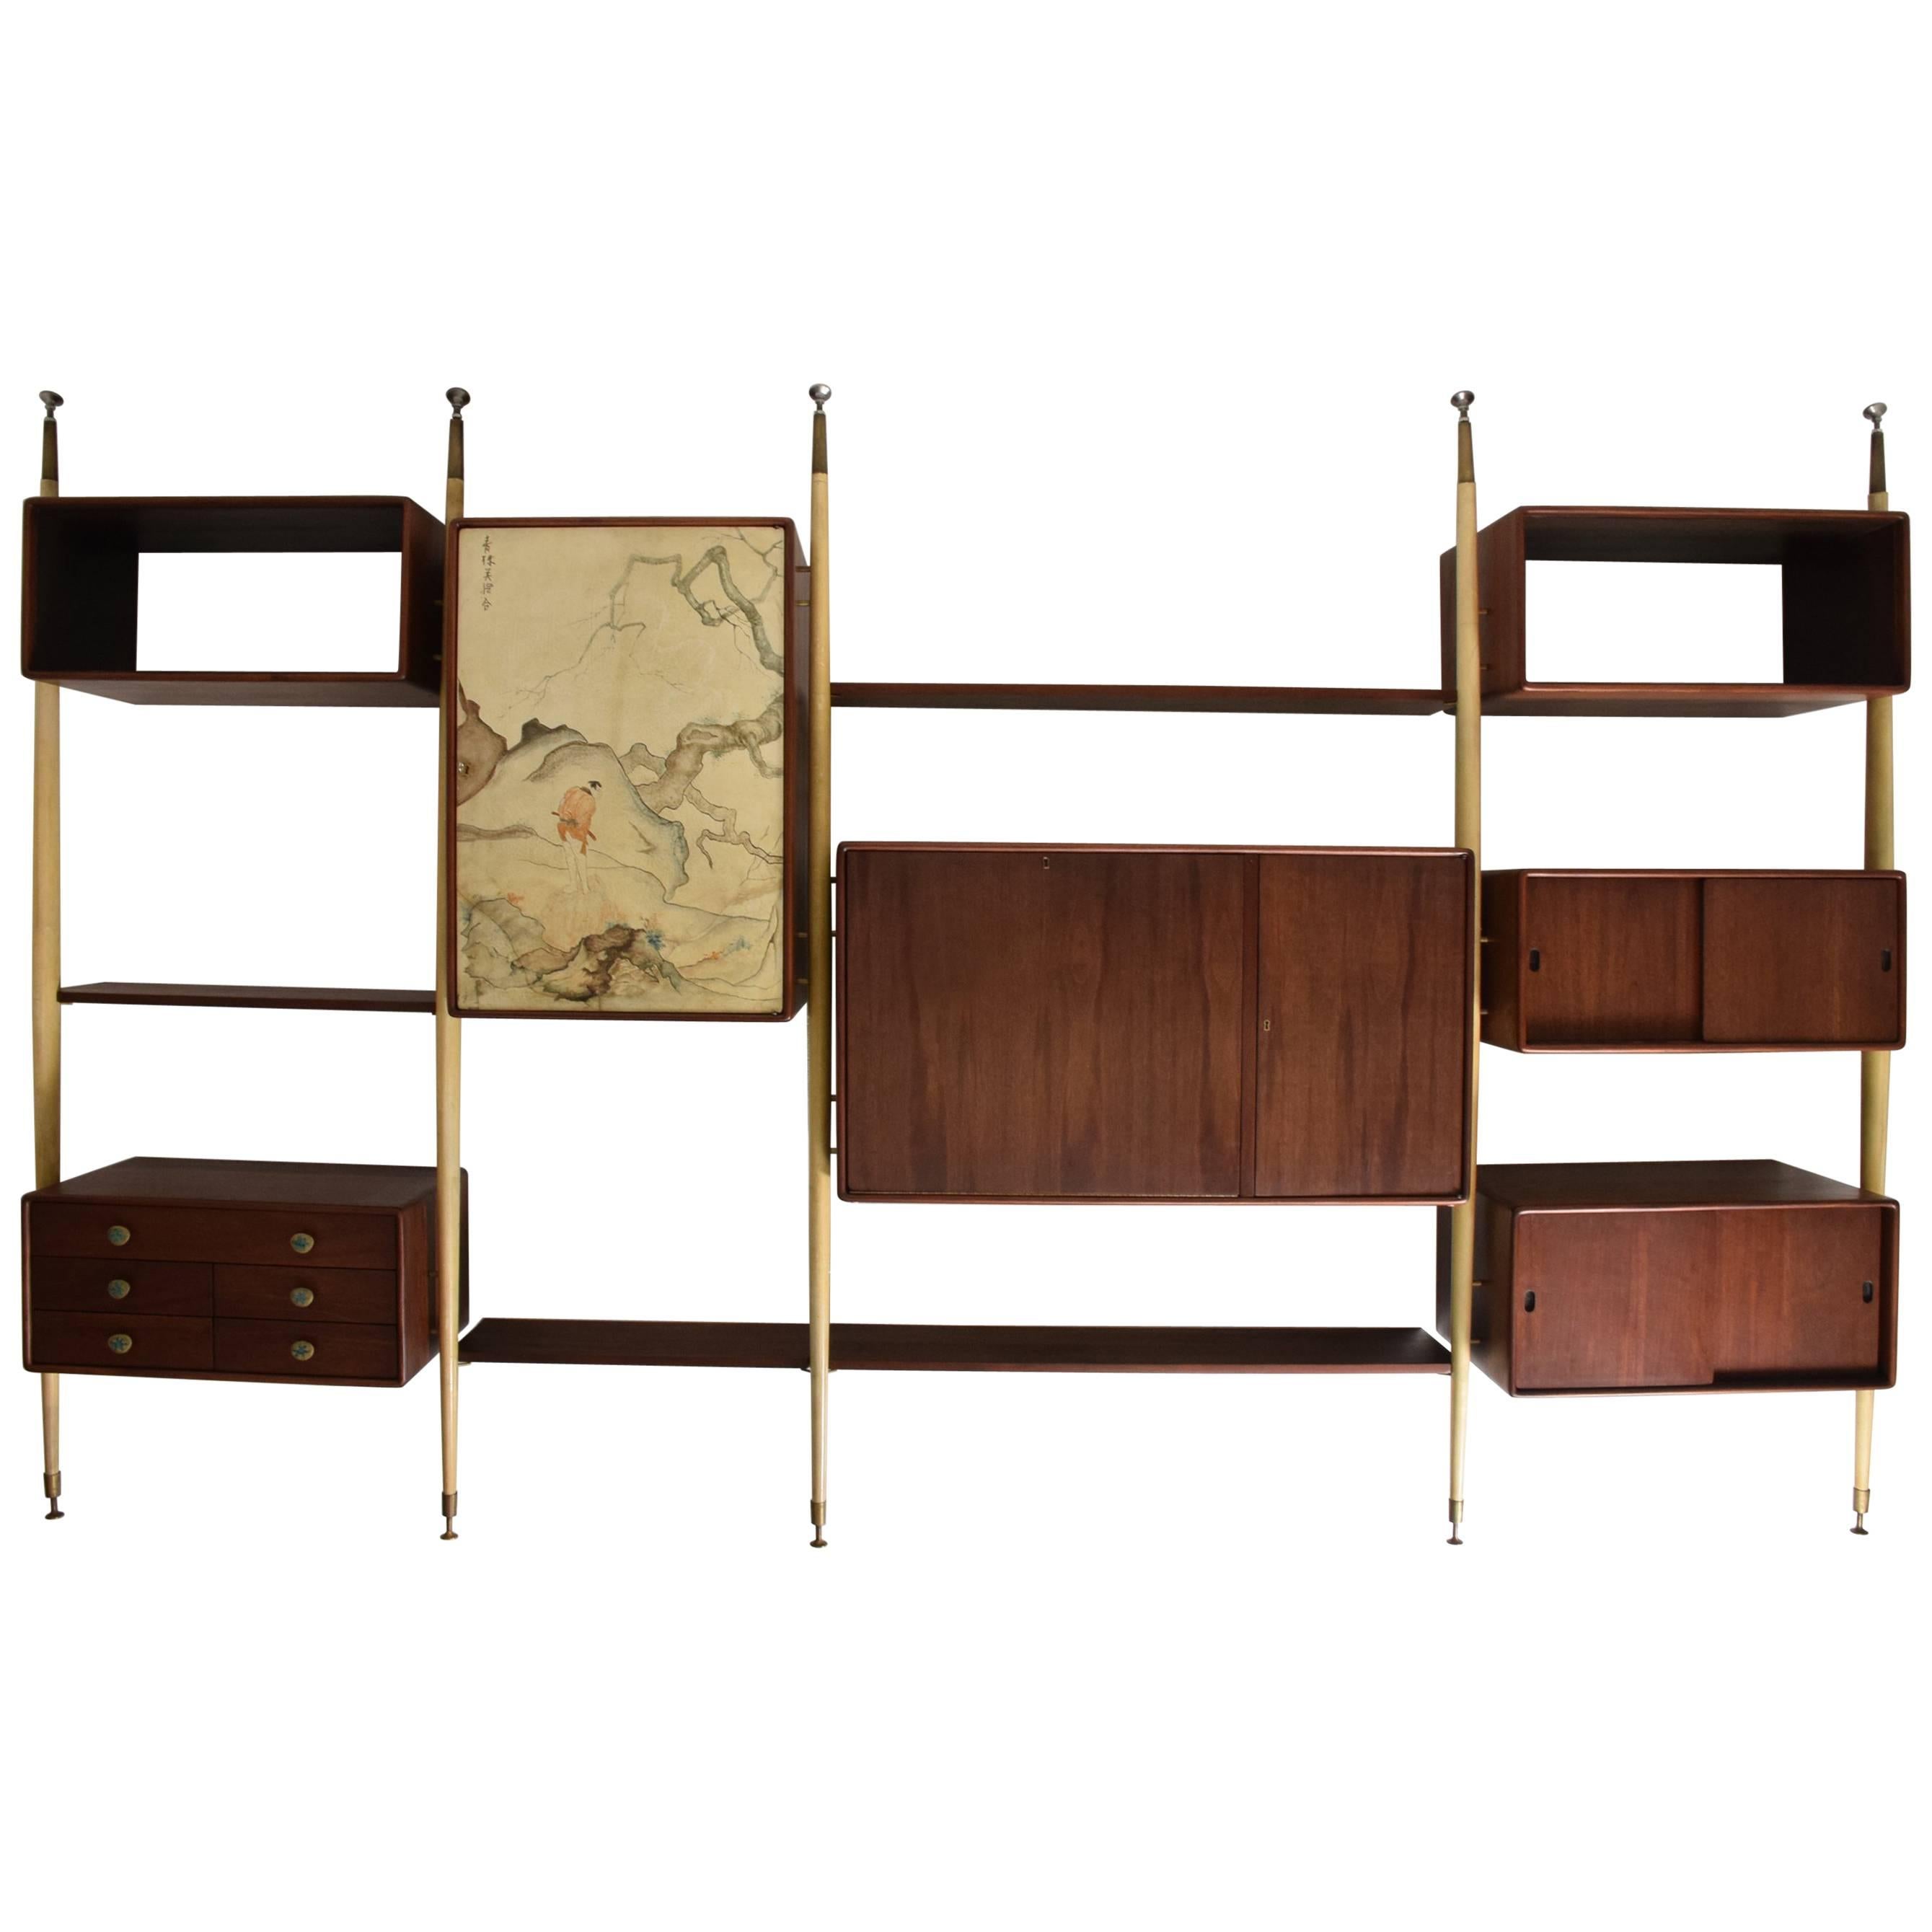 Monumental Mexican Modernist Wall Unit in Solid Mahogany and Goatskin